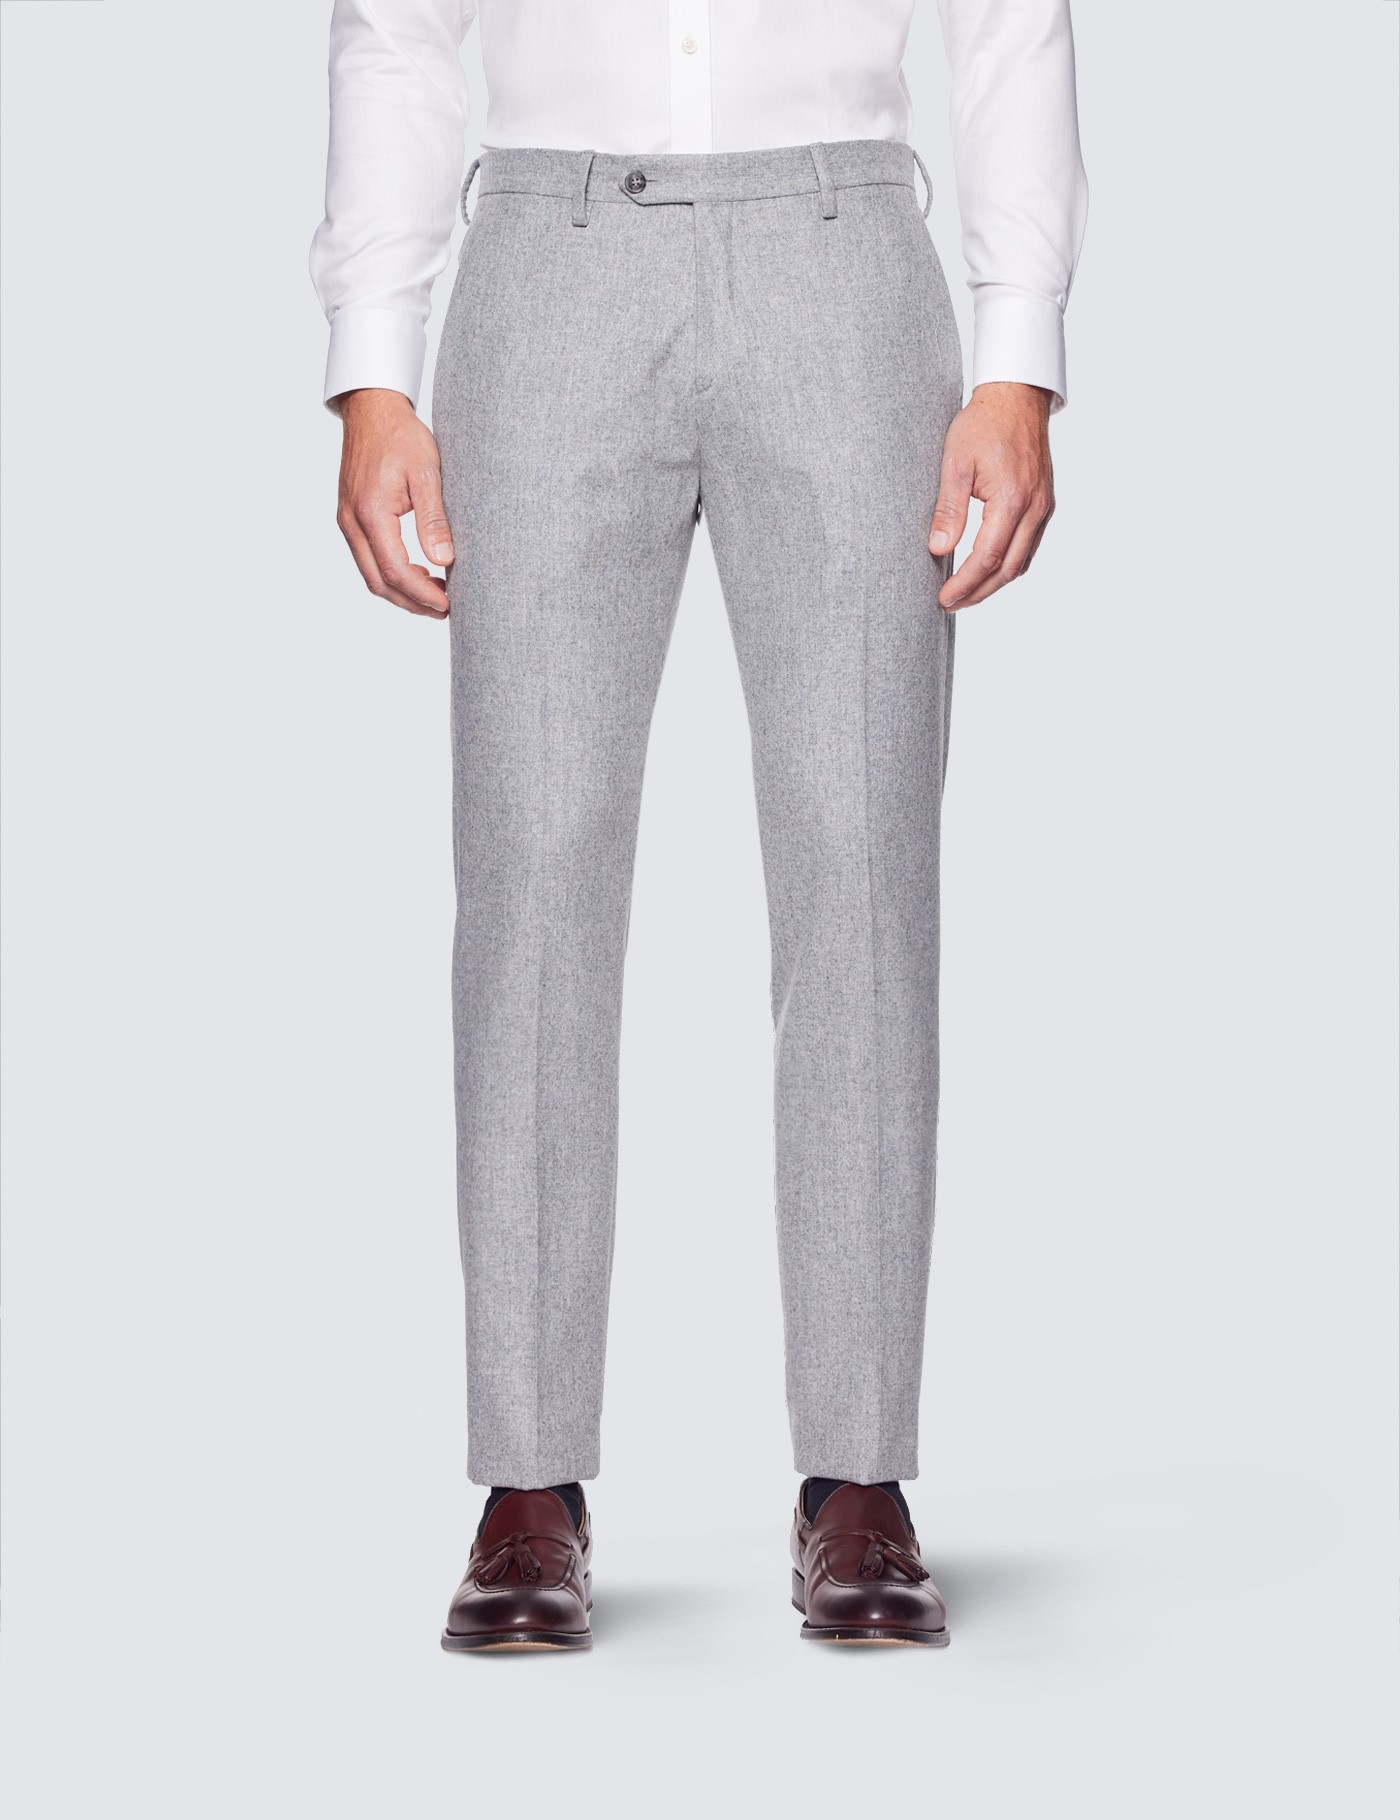 Buy LP ATH.WORK Grey Checks Polyester Viscose Tapered Fit Men's Work Wear  Trousers | Shoppers Stop